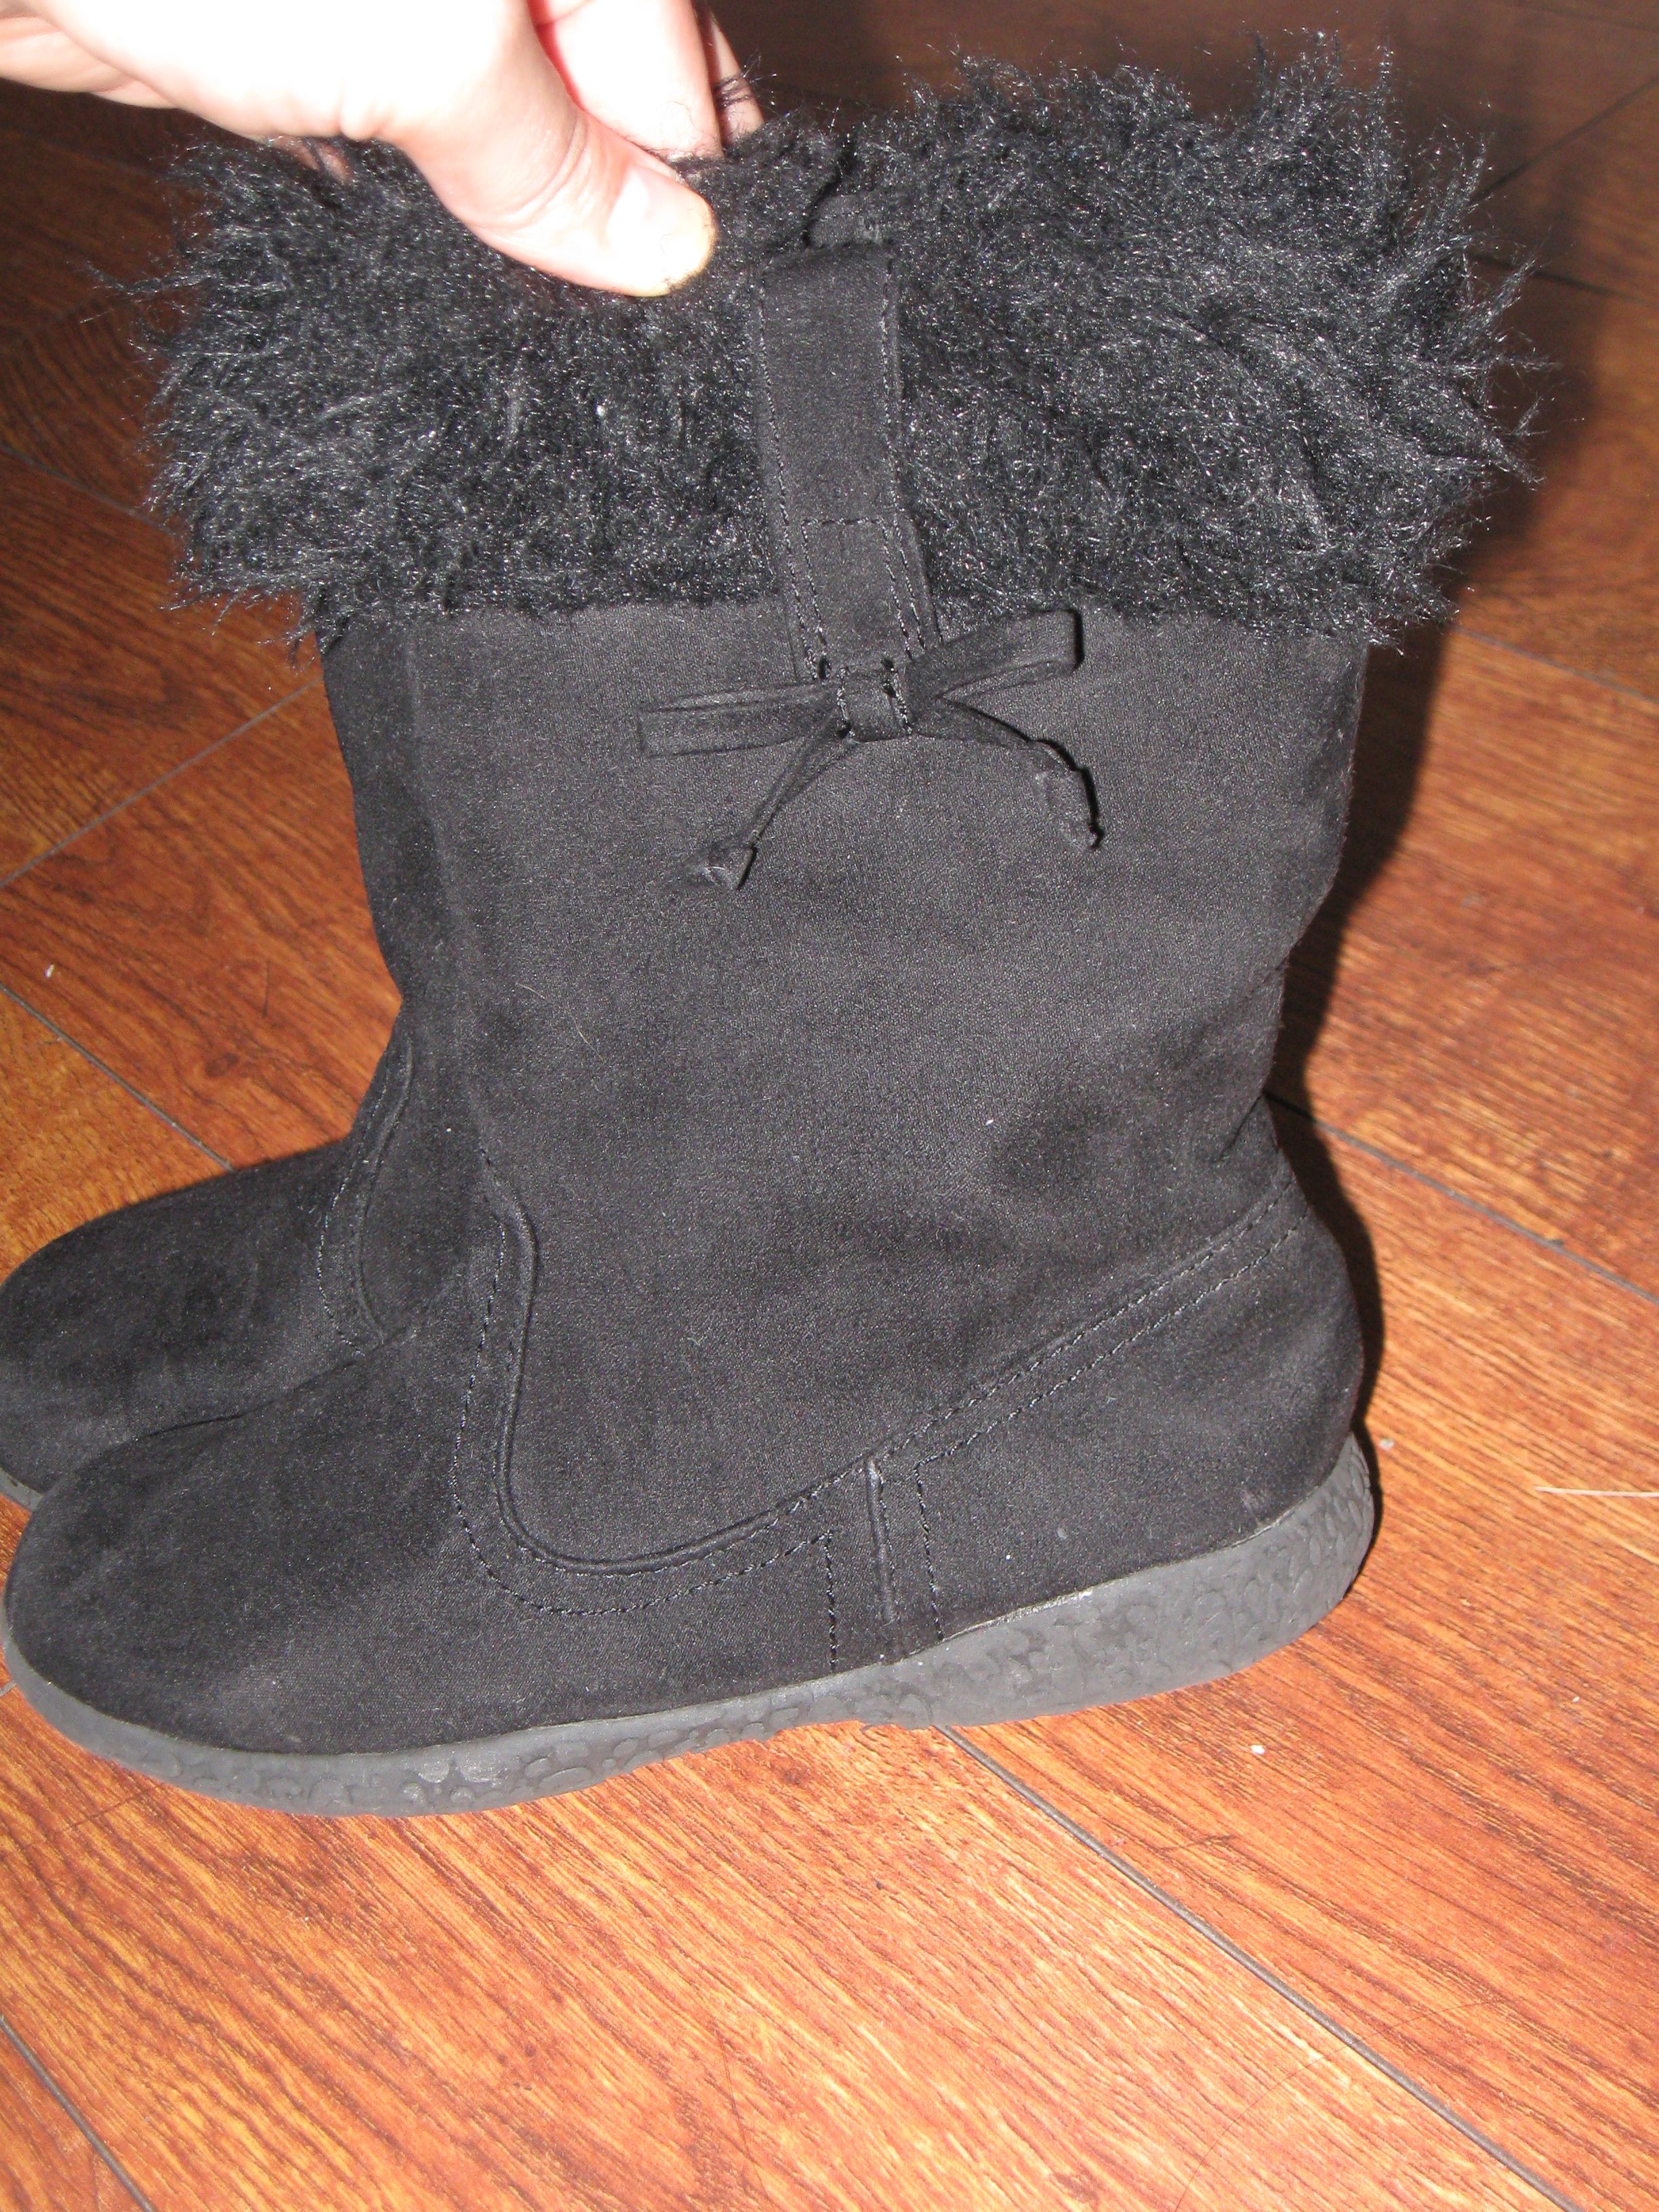 THE CHILDREN'S PLACE Girls Kids Black Suede Winter Fall Boots Sz 12